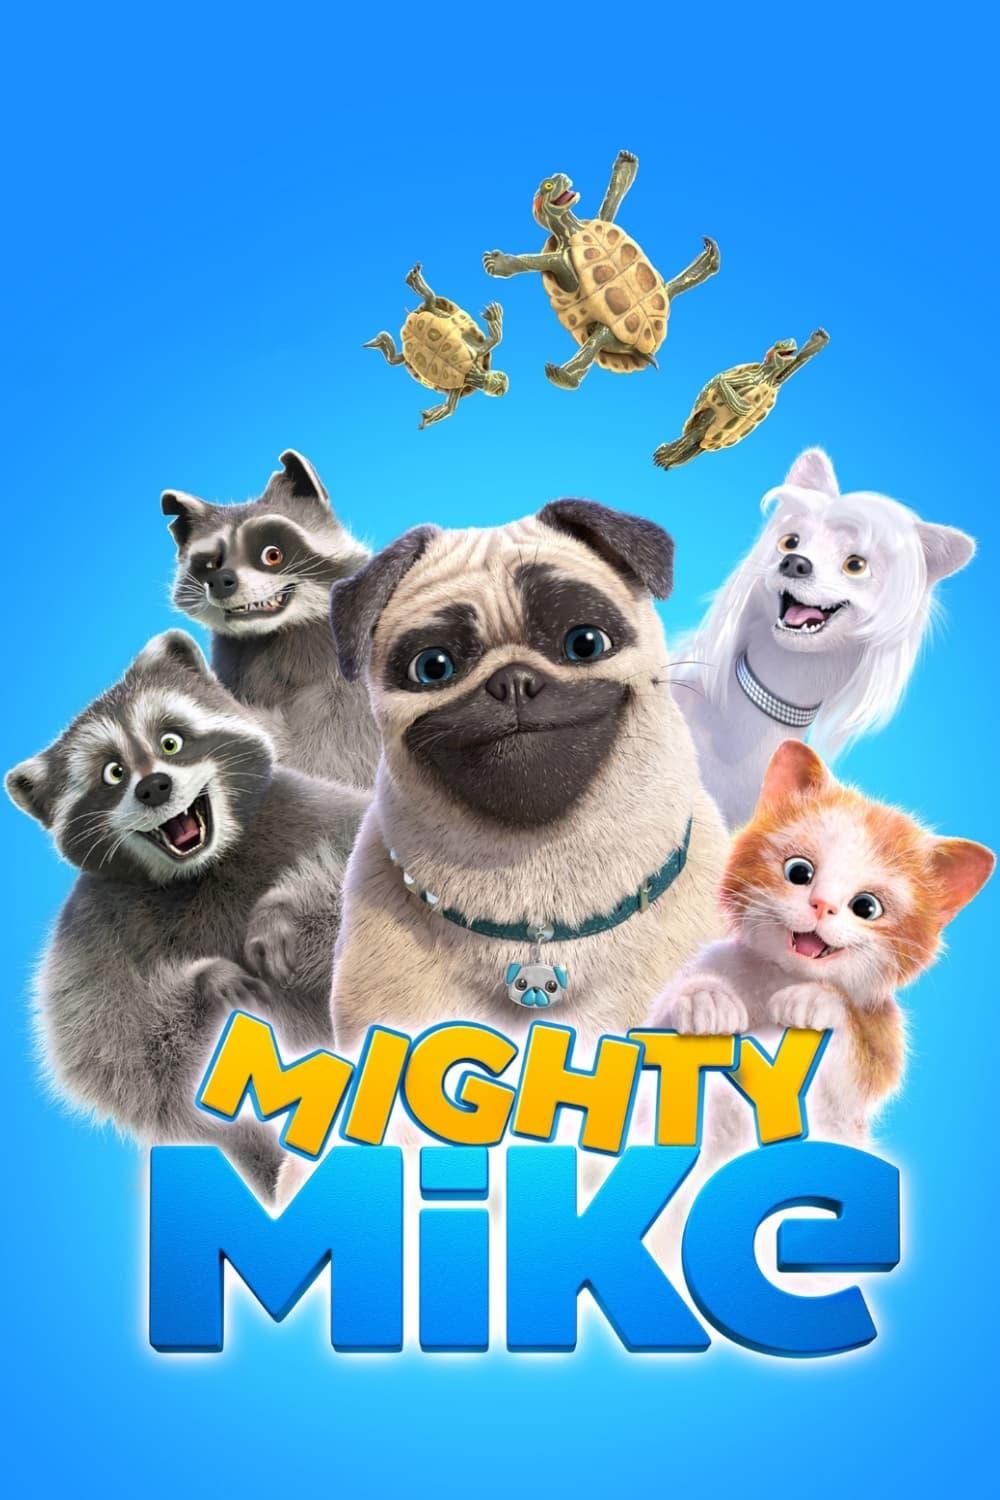 Mighty Mike poster